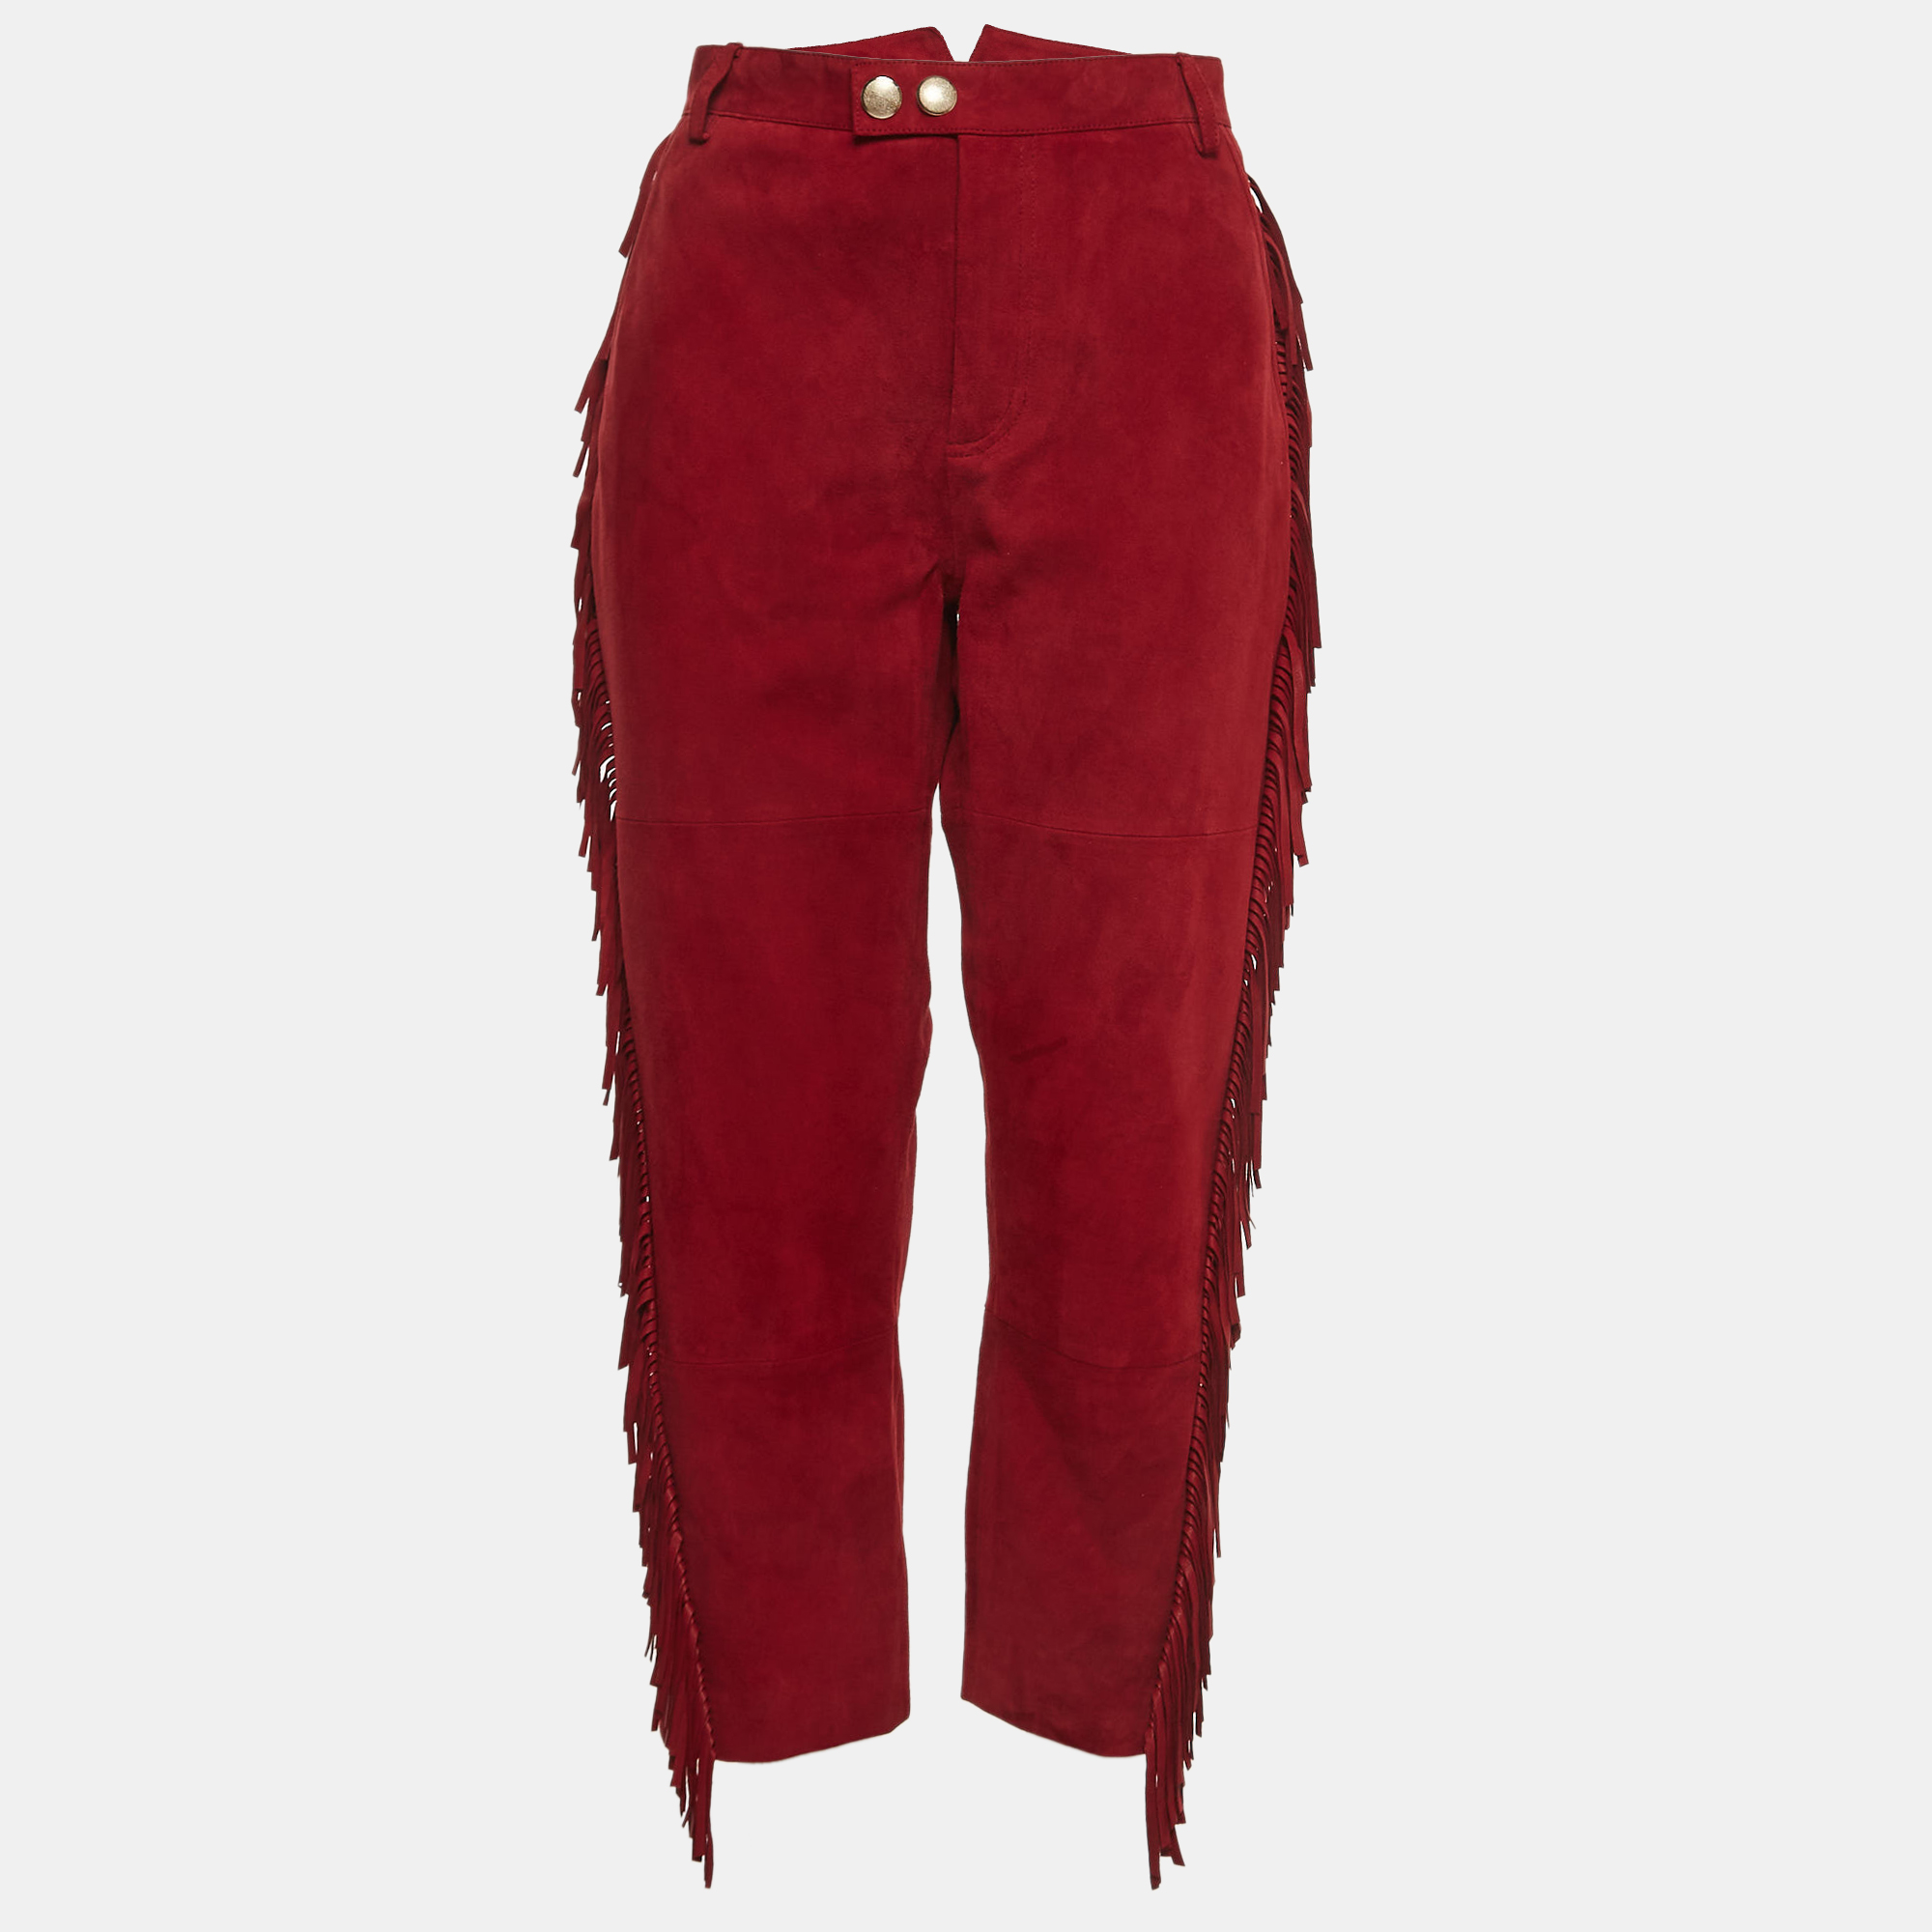 

Zadig & Voltaire Red Suede Fringed Trousers